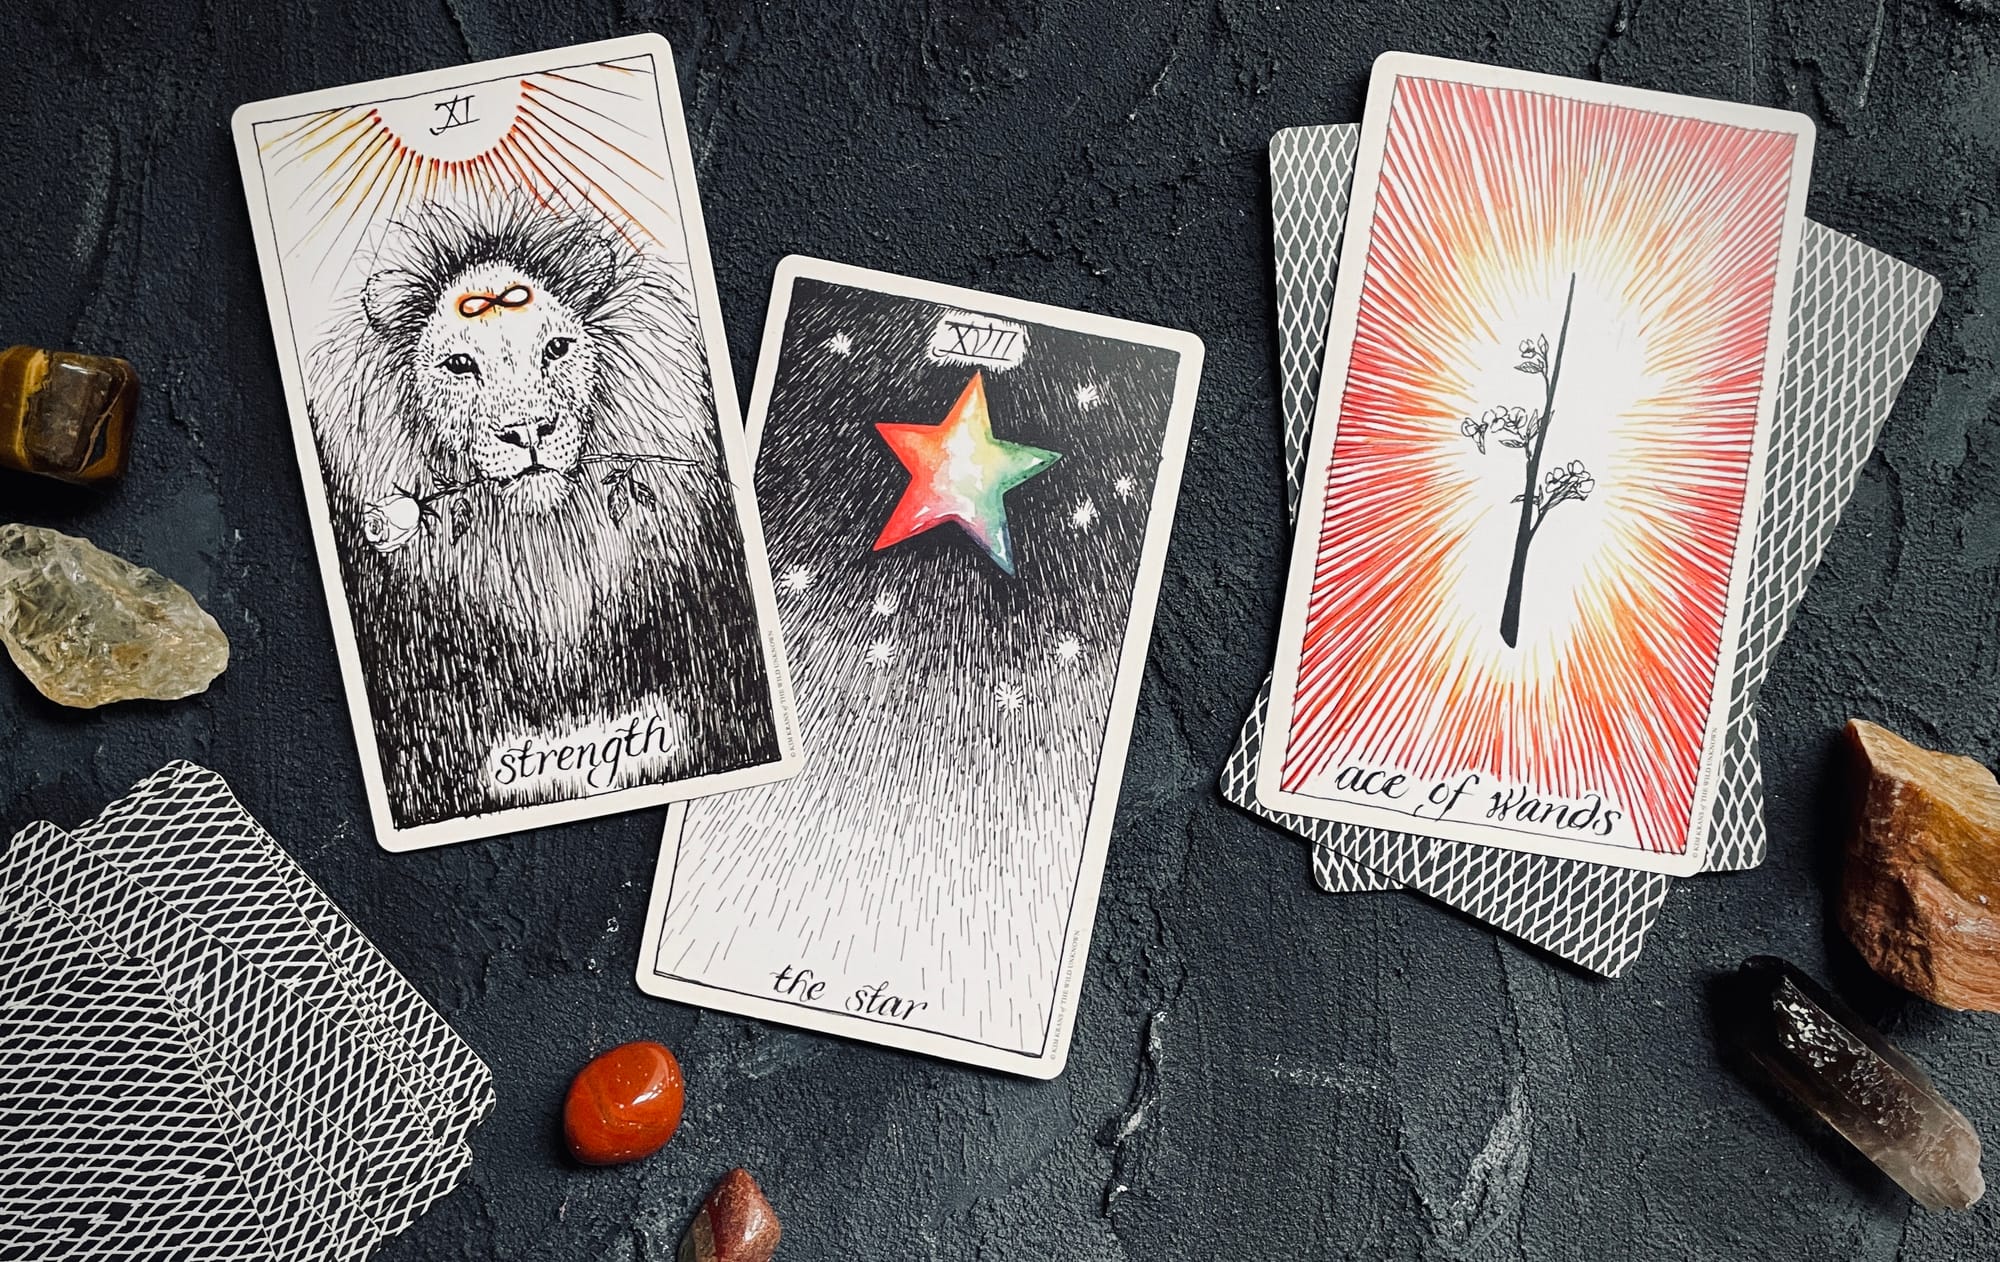 strength, the star, and the ace of wands from the wild unknown tarot